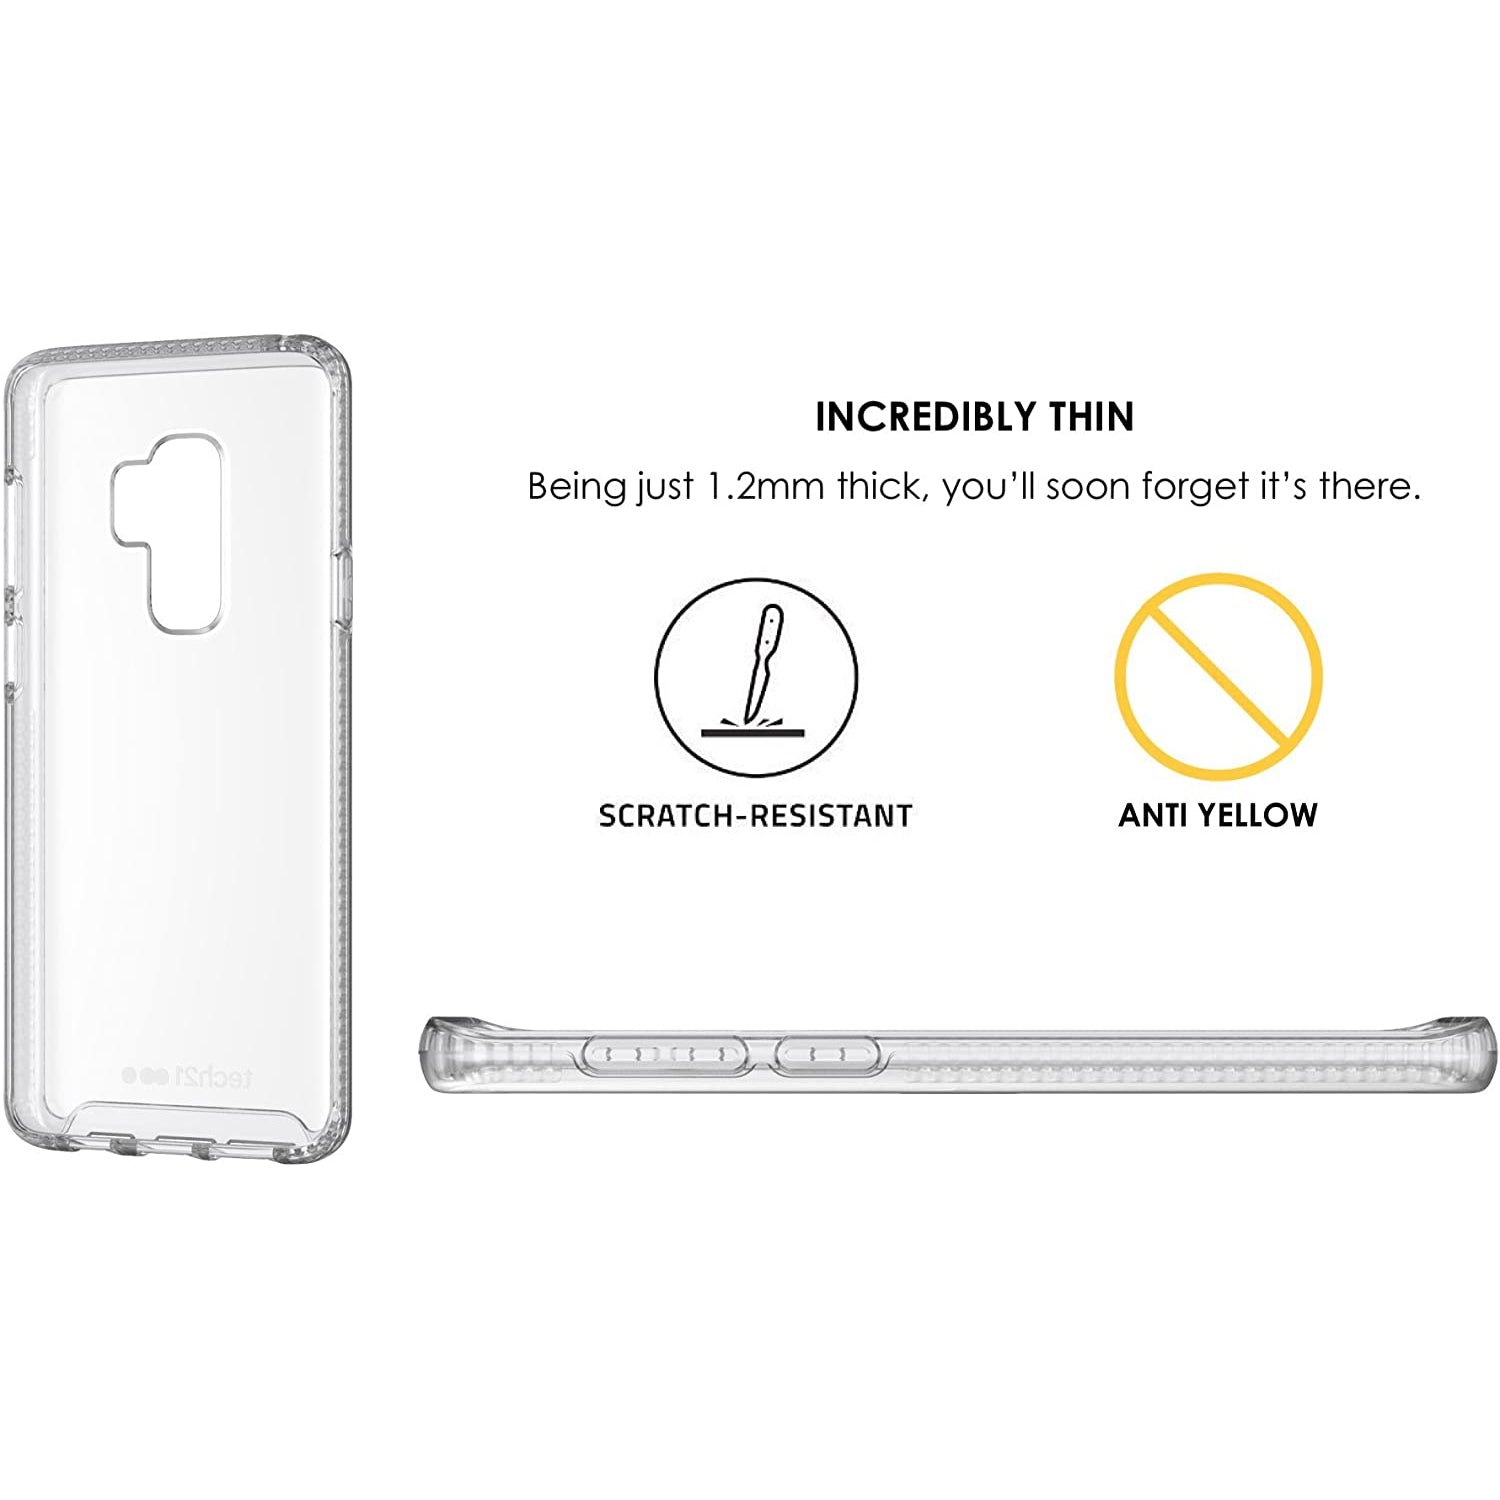 Tech21 Pure Clear Case for Samsung Galaxy S9 Plus - Clear